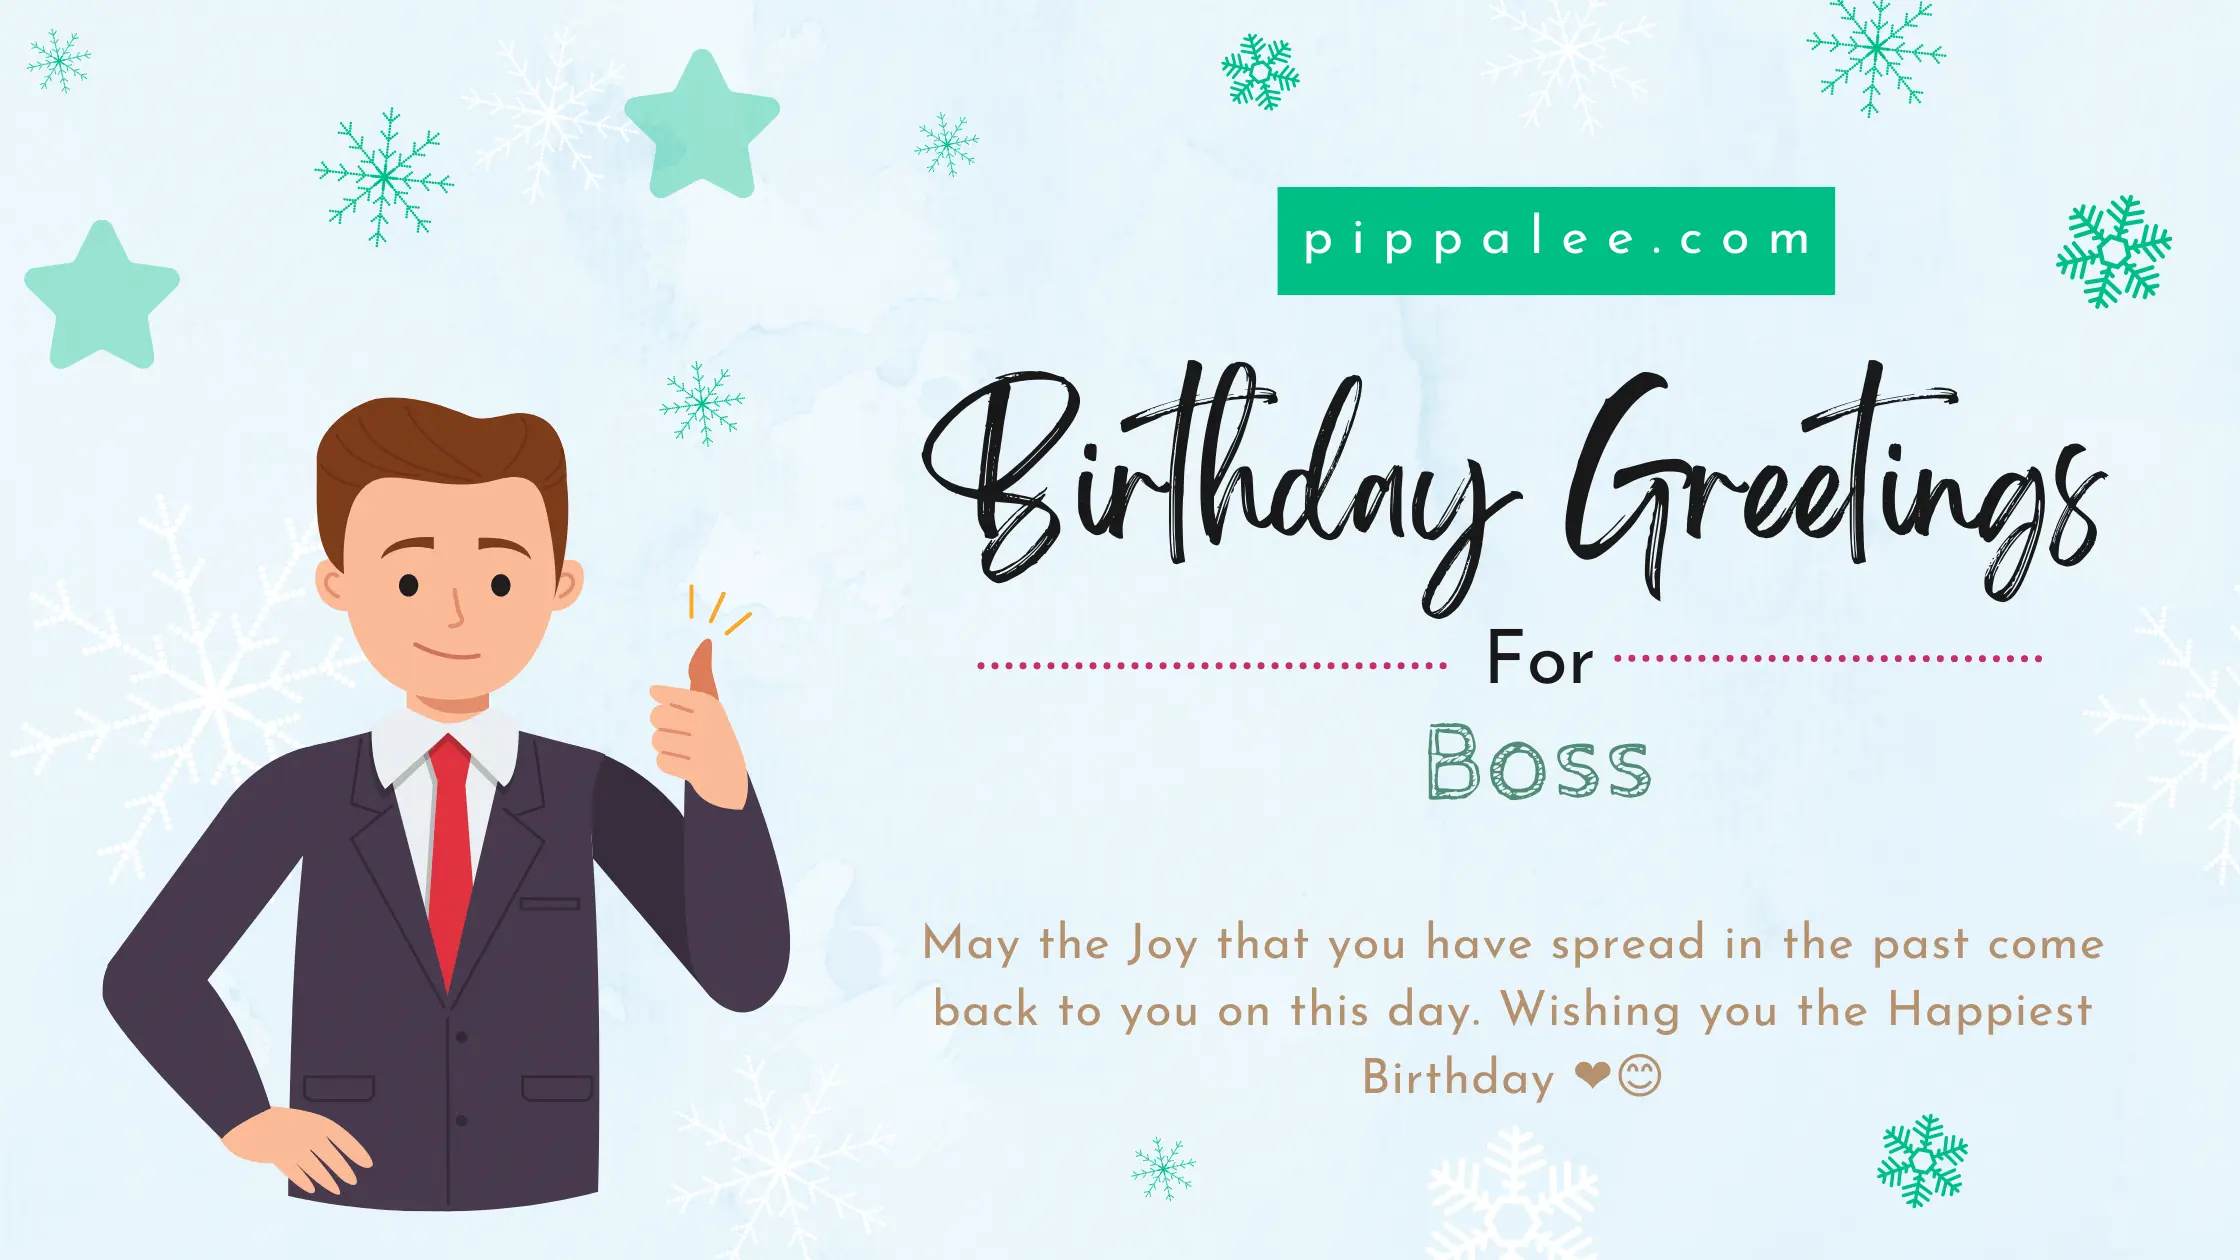 Birthday Greetings For Boss - Wishes And Messages